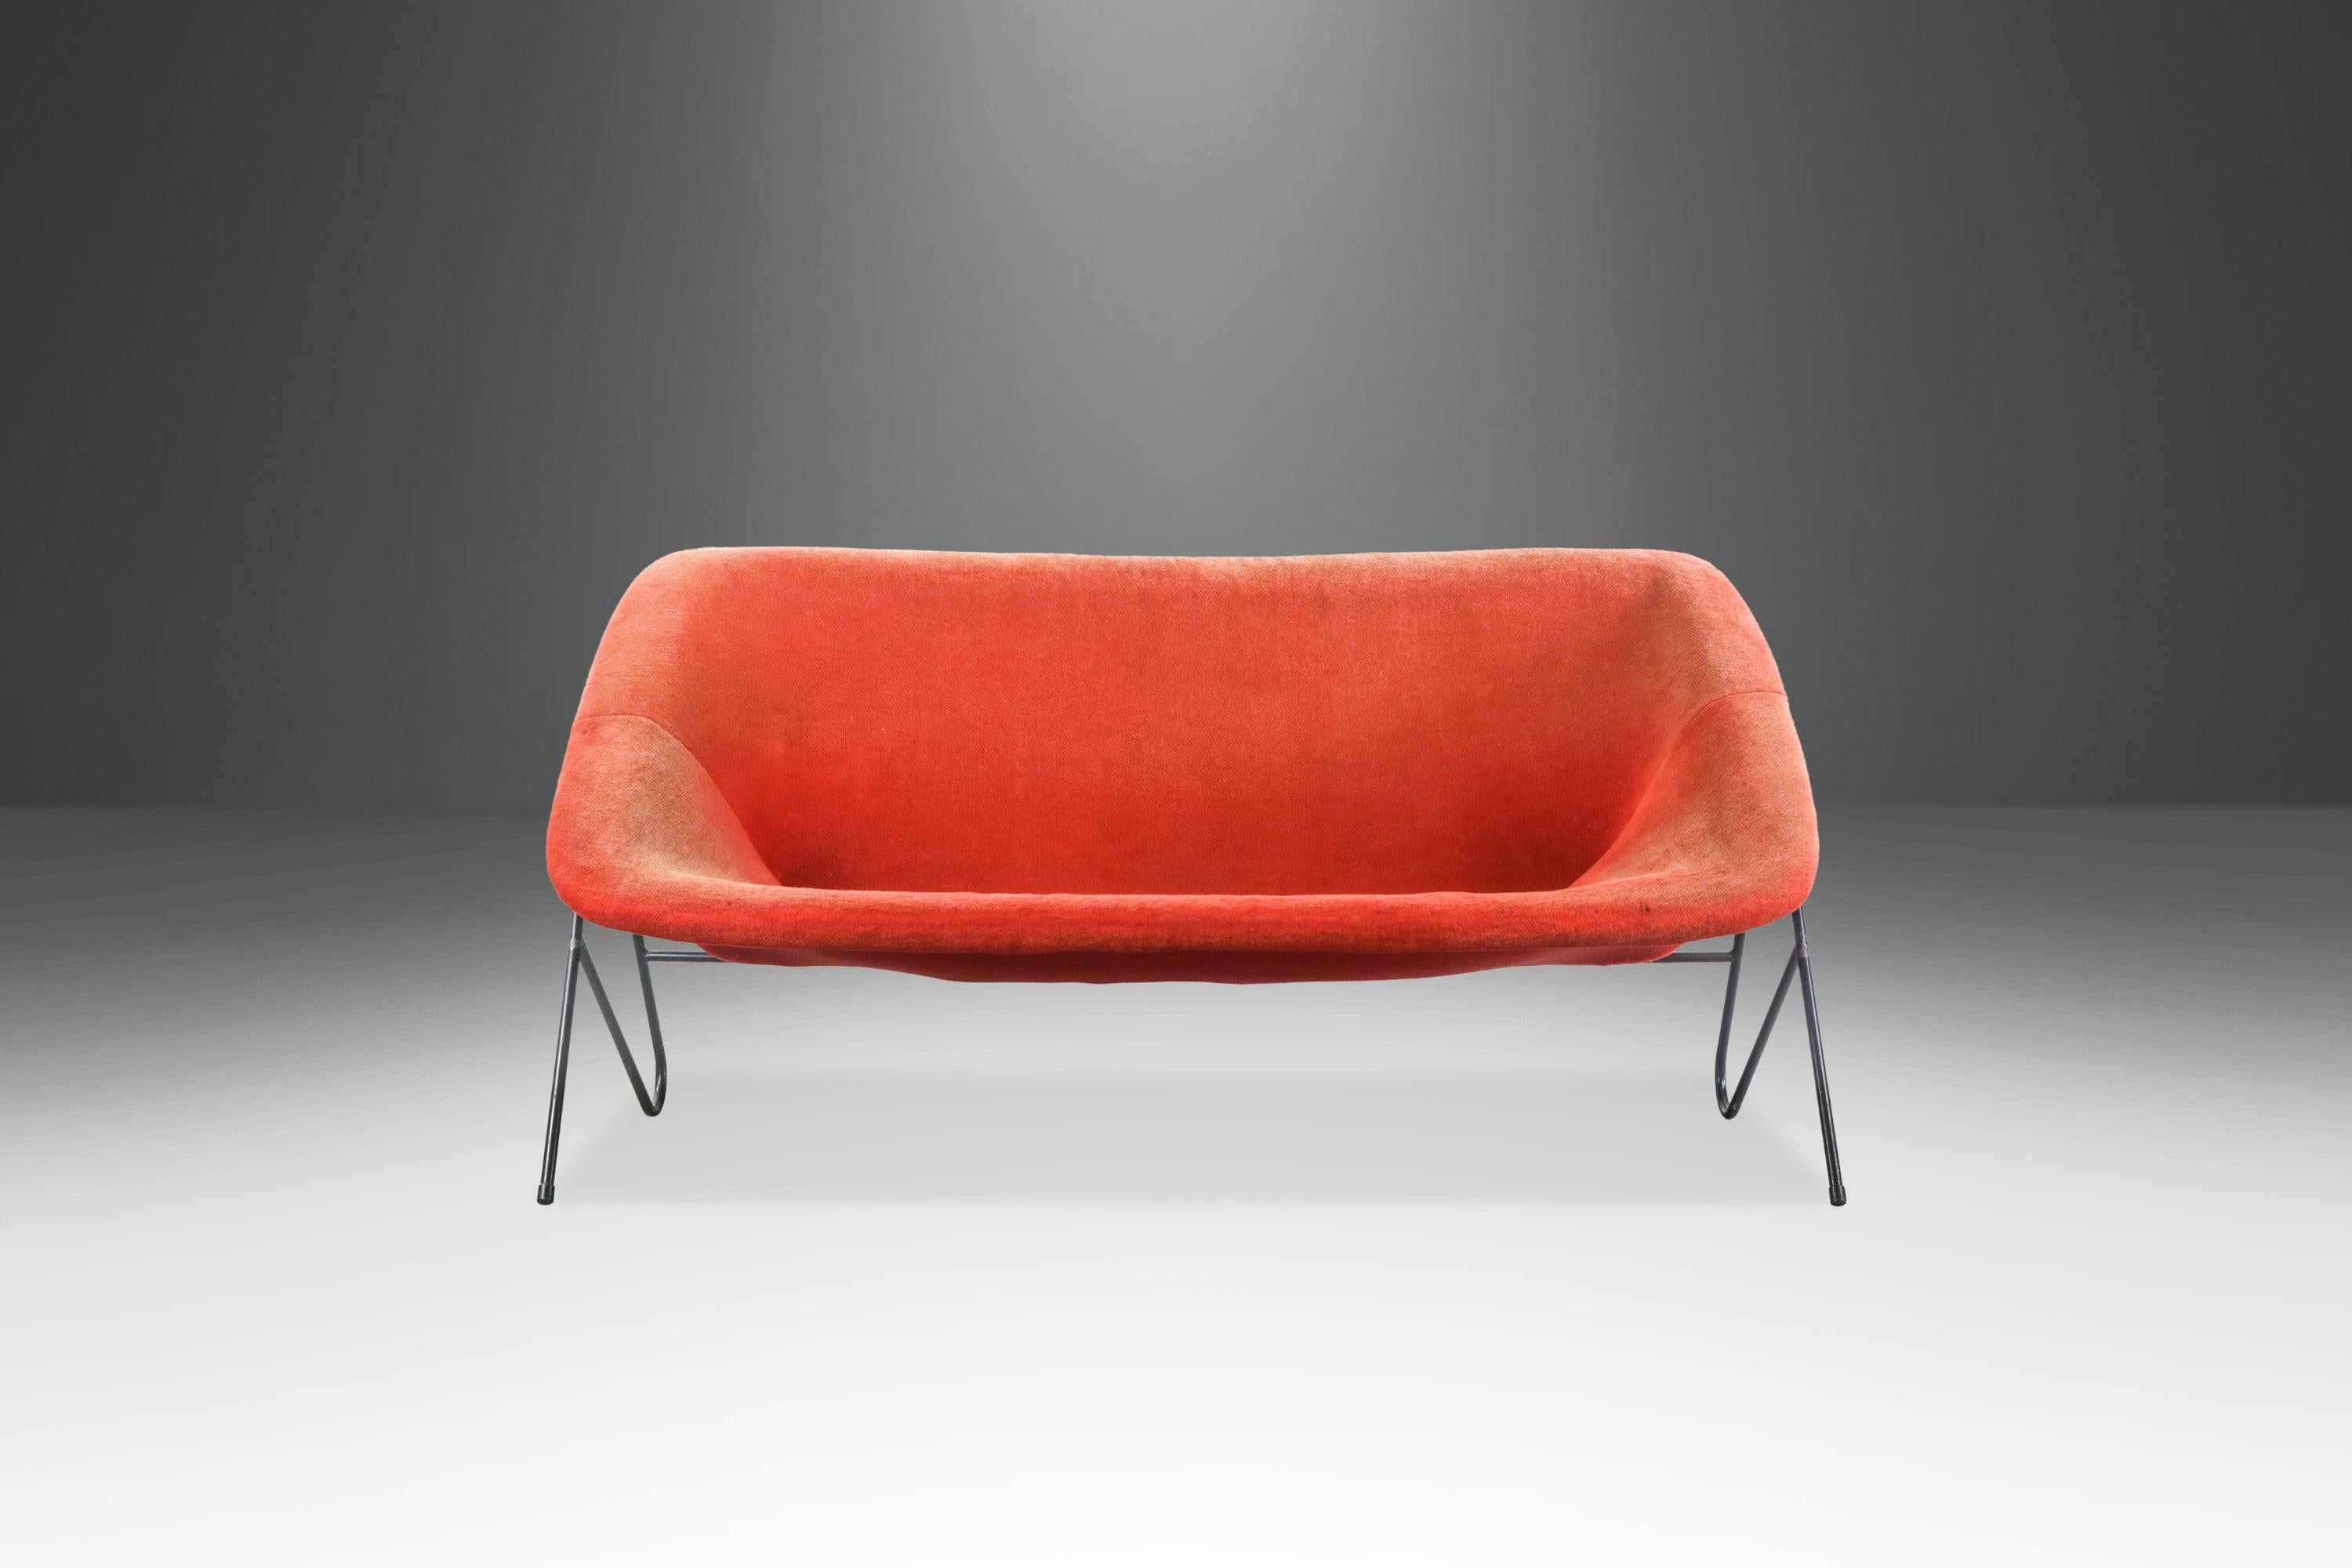 Italian Modern Sling Sofa with Iron Frame and Original Red Upholstery, c. 1970s In Good Condition For Sale In Deland, FL